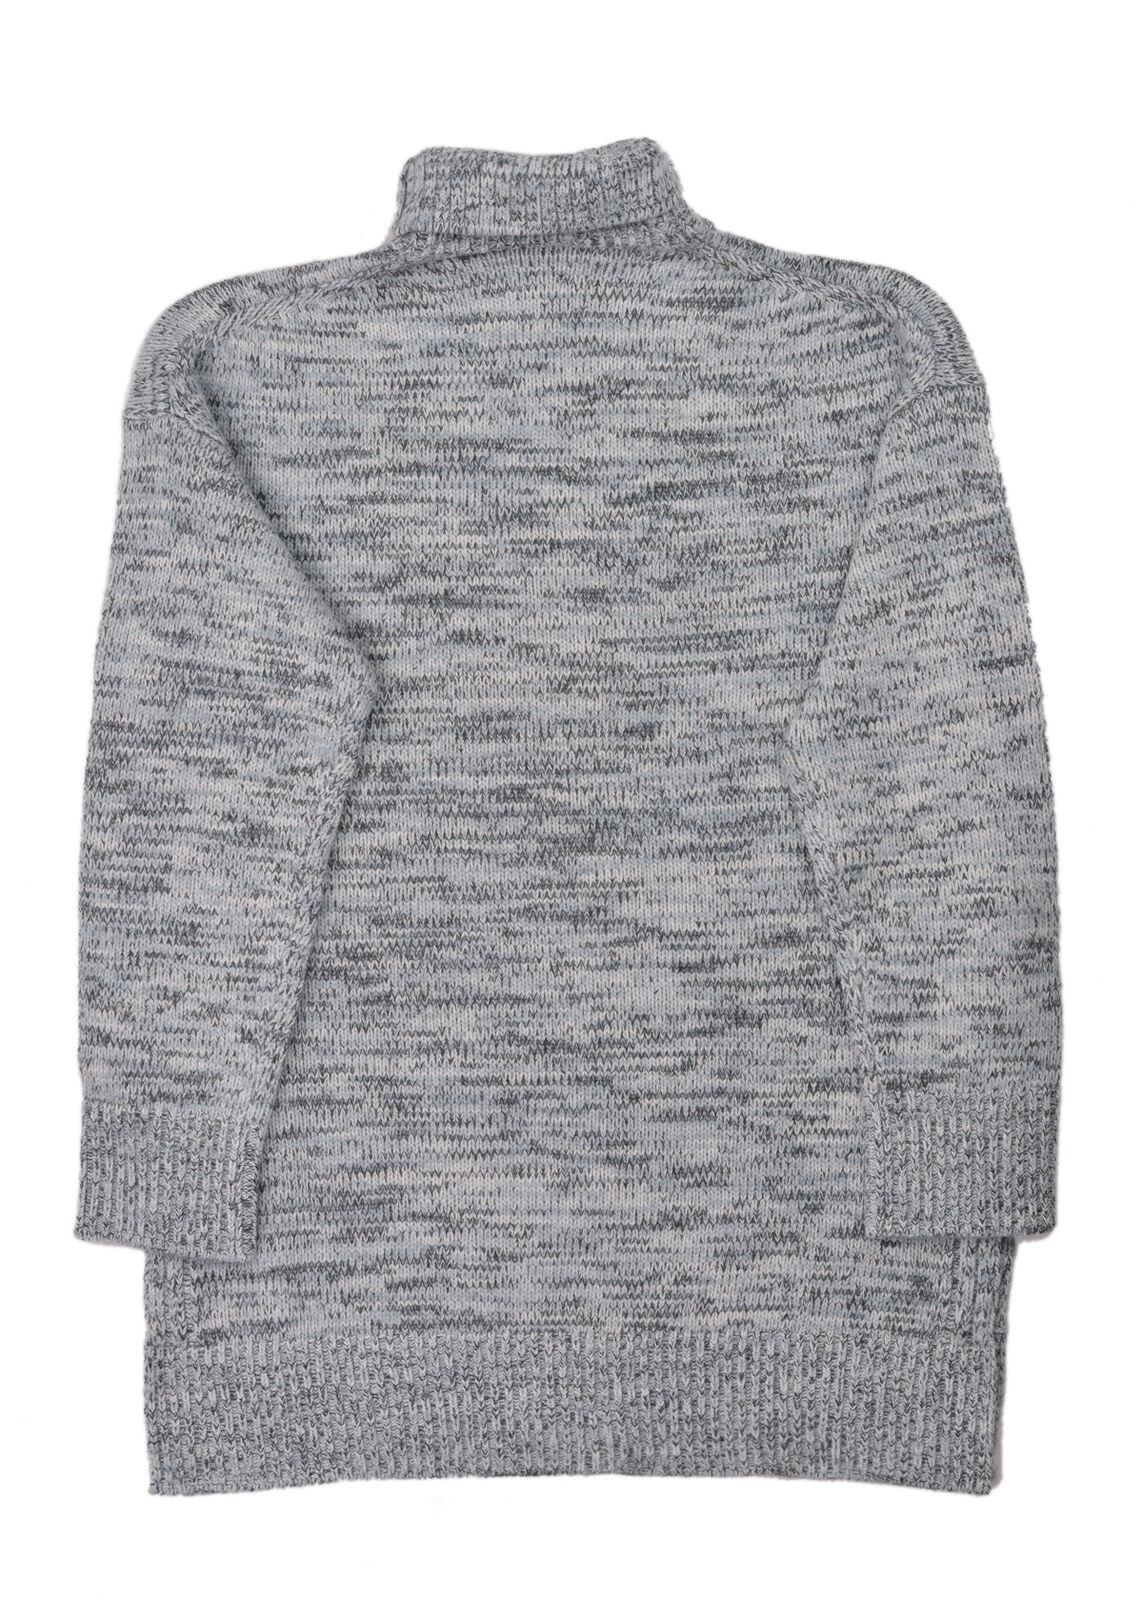 Dior Women's Blue Grey Wool Turtleneck Knit Tunic Sweater In New Condition For Sale In Brooklyn, NY